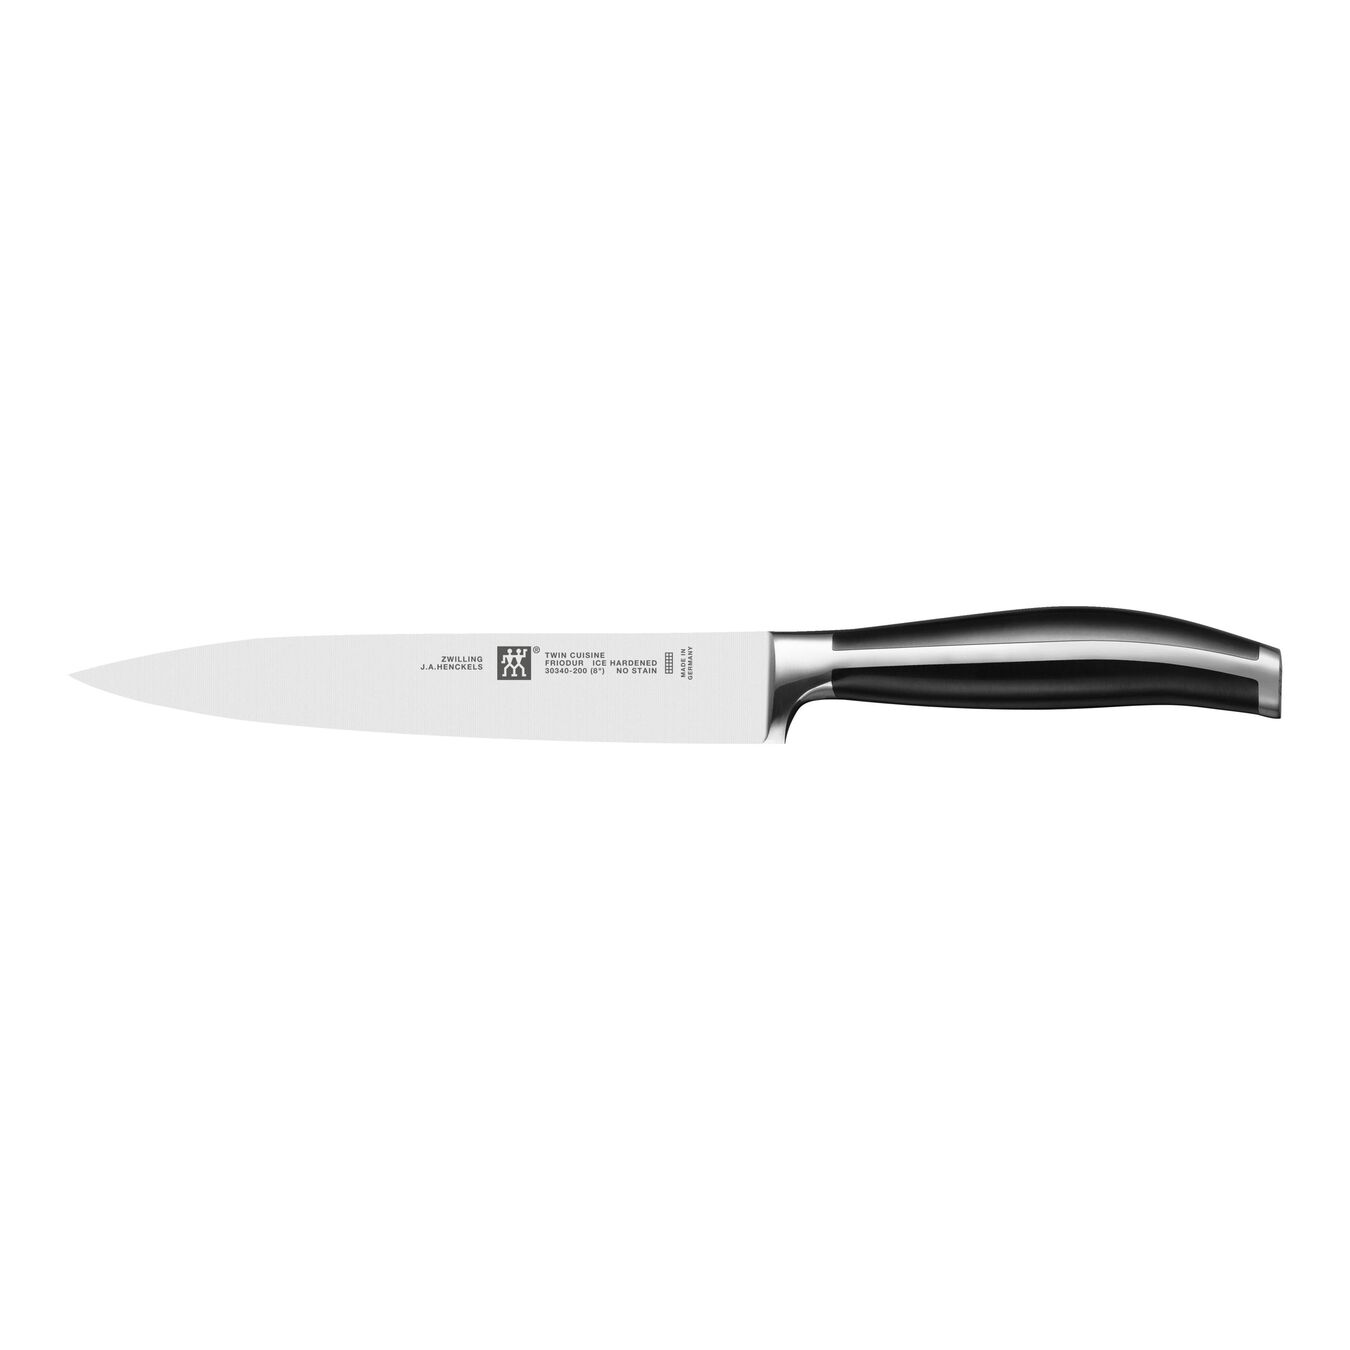 8 inch Carving knife - Visual Imperfections,,large 1